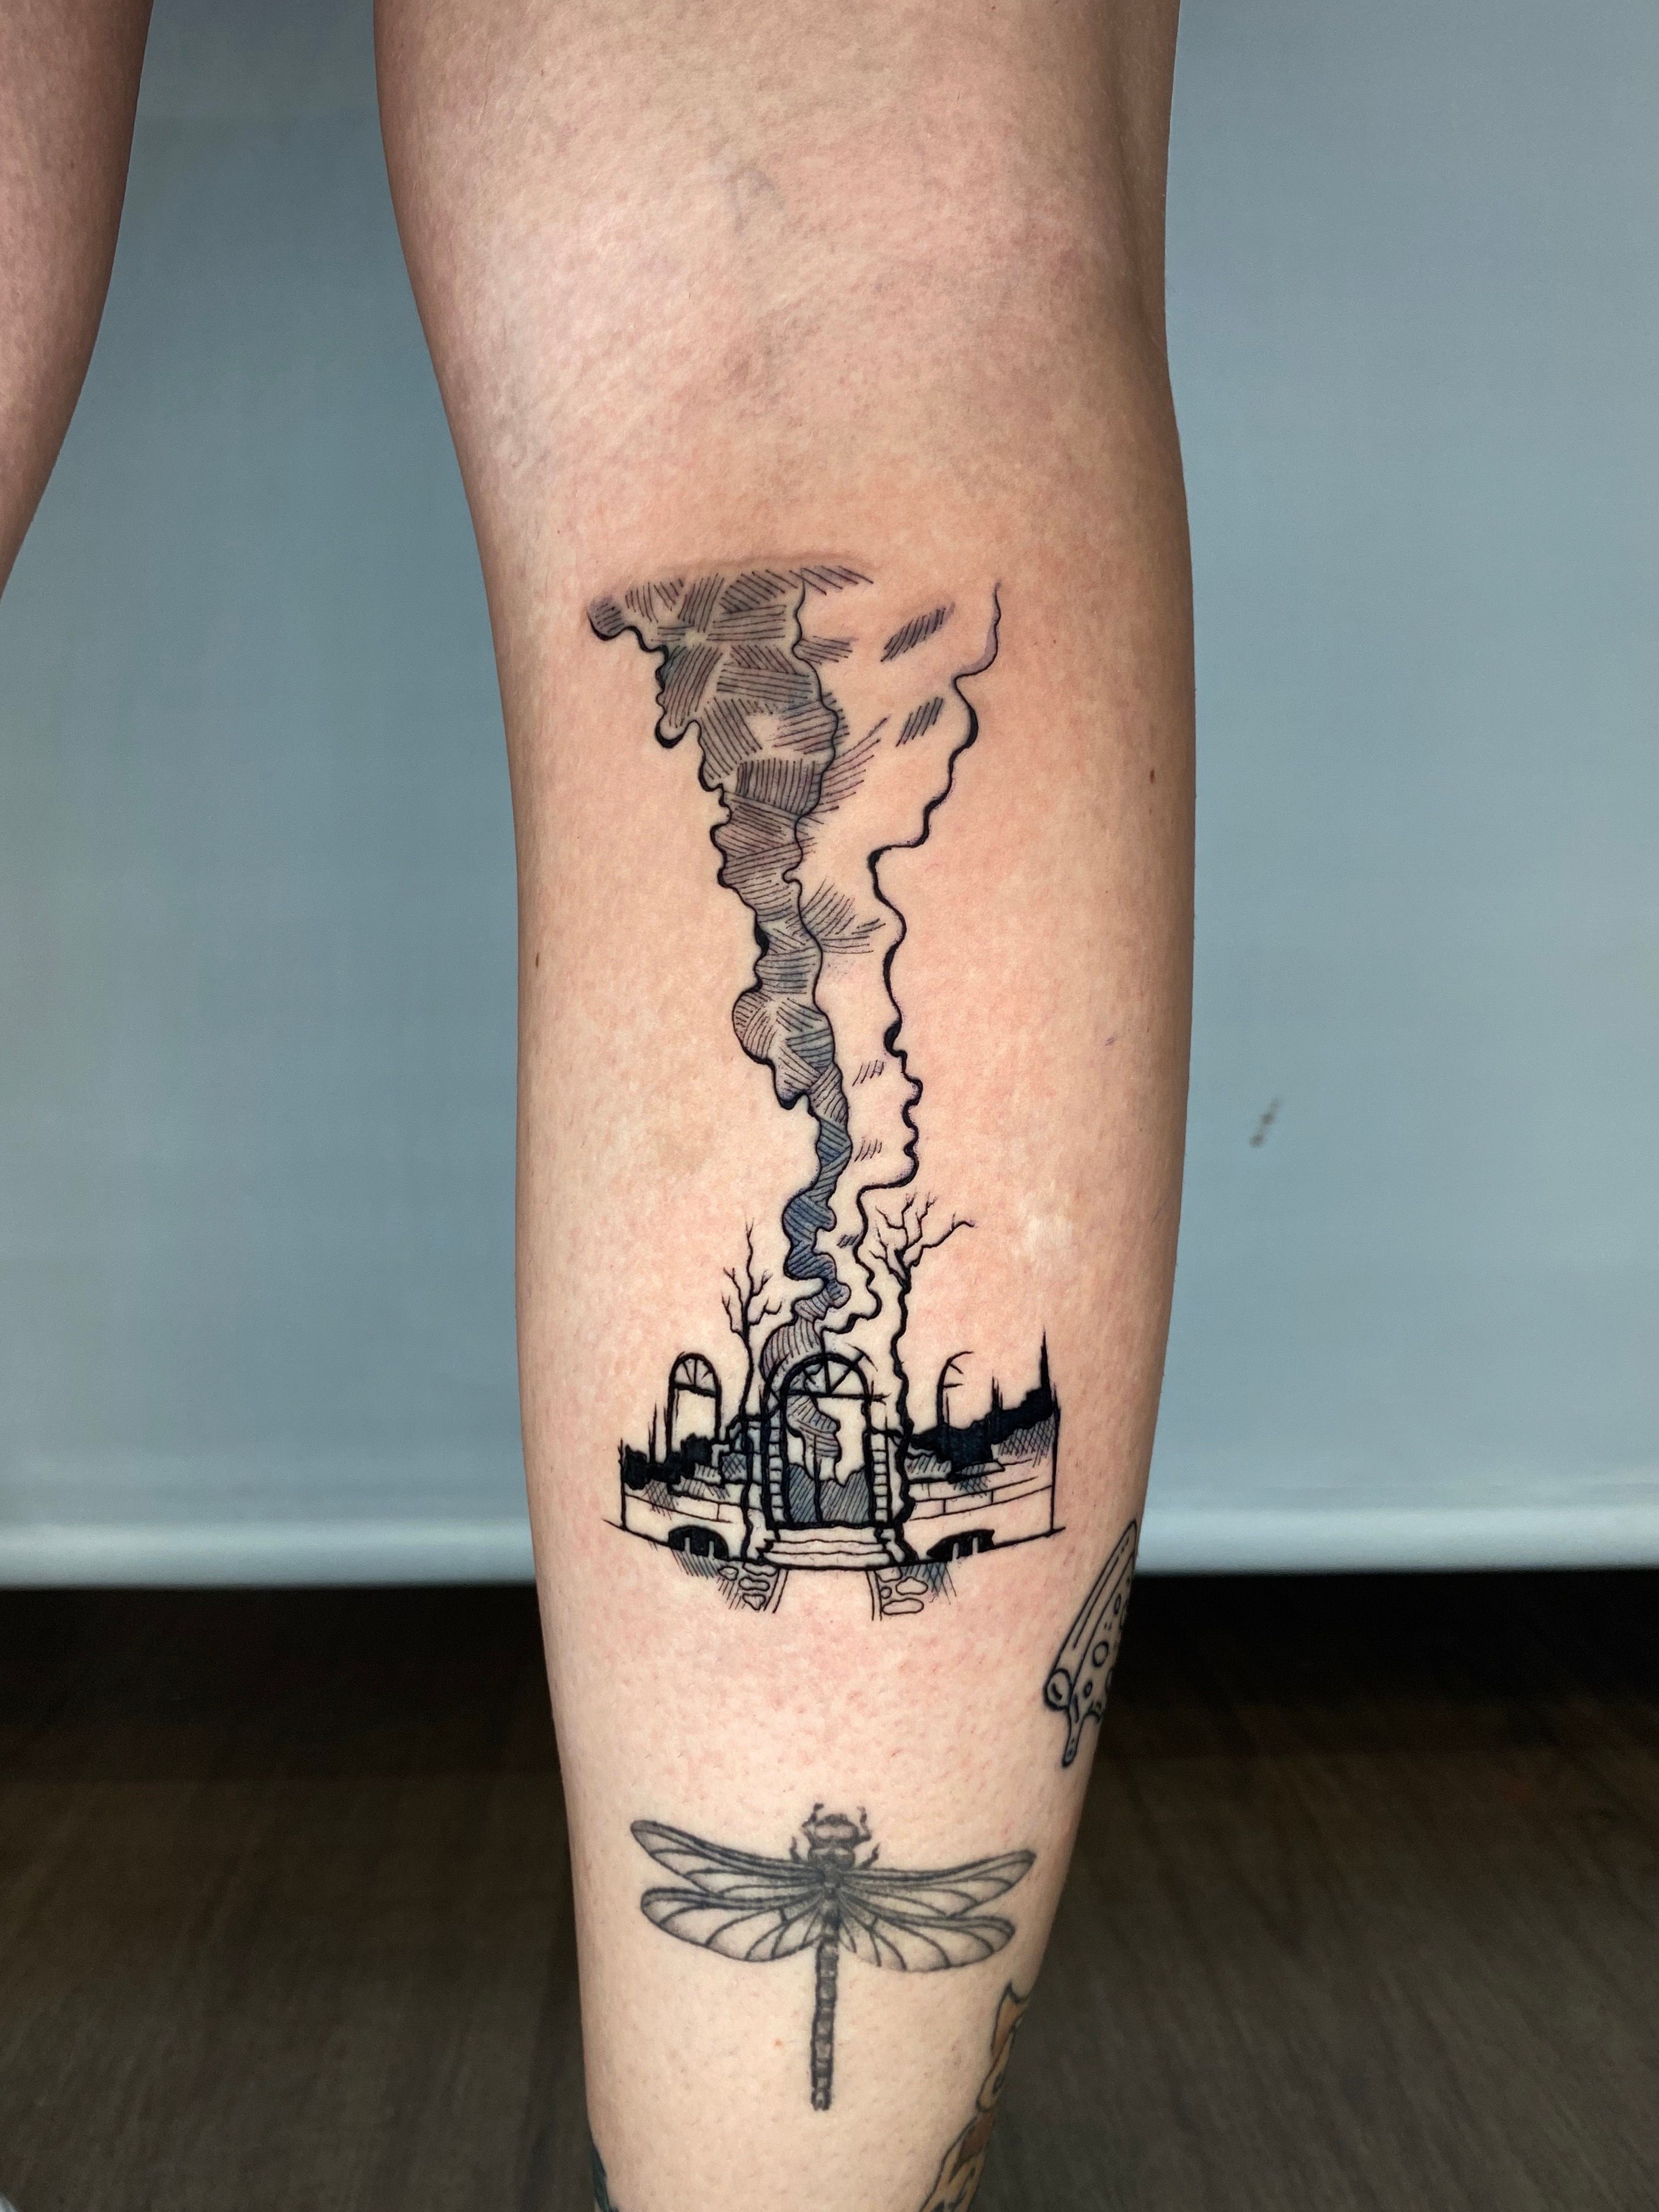 Tattoo tagged with: small, single needle, tiny, train, travel, ifttt,  little, forearm, maxebrother | inked-app.com